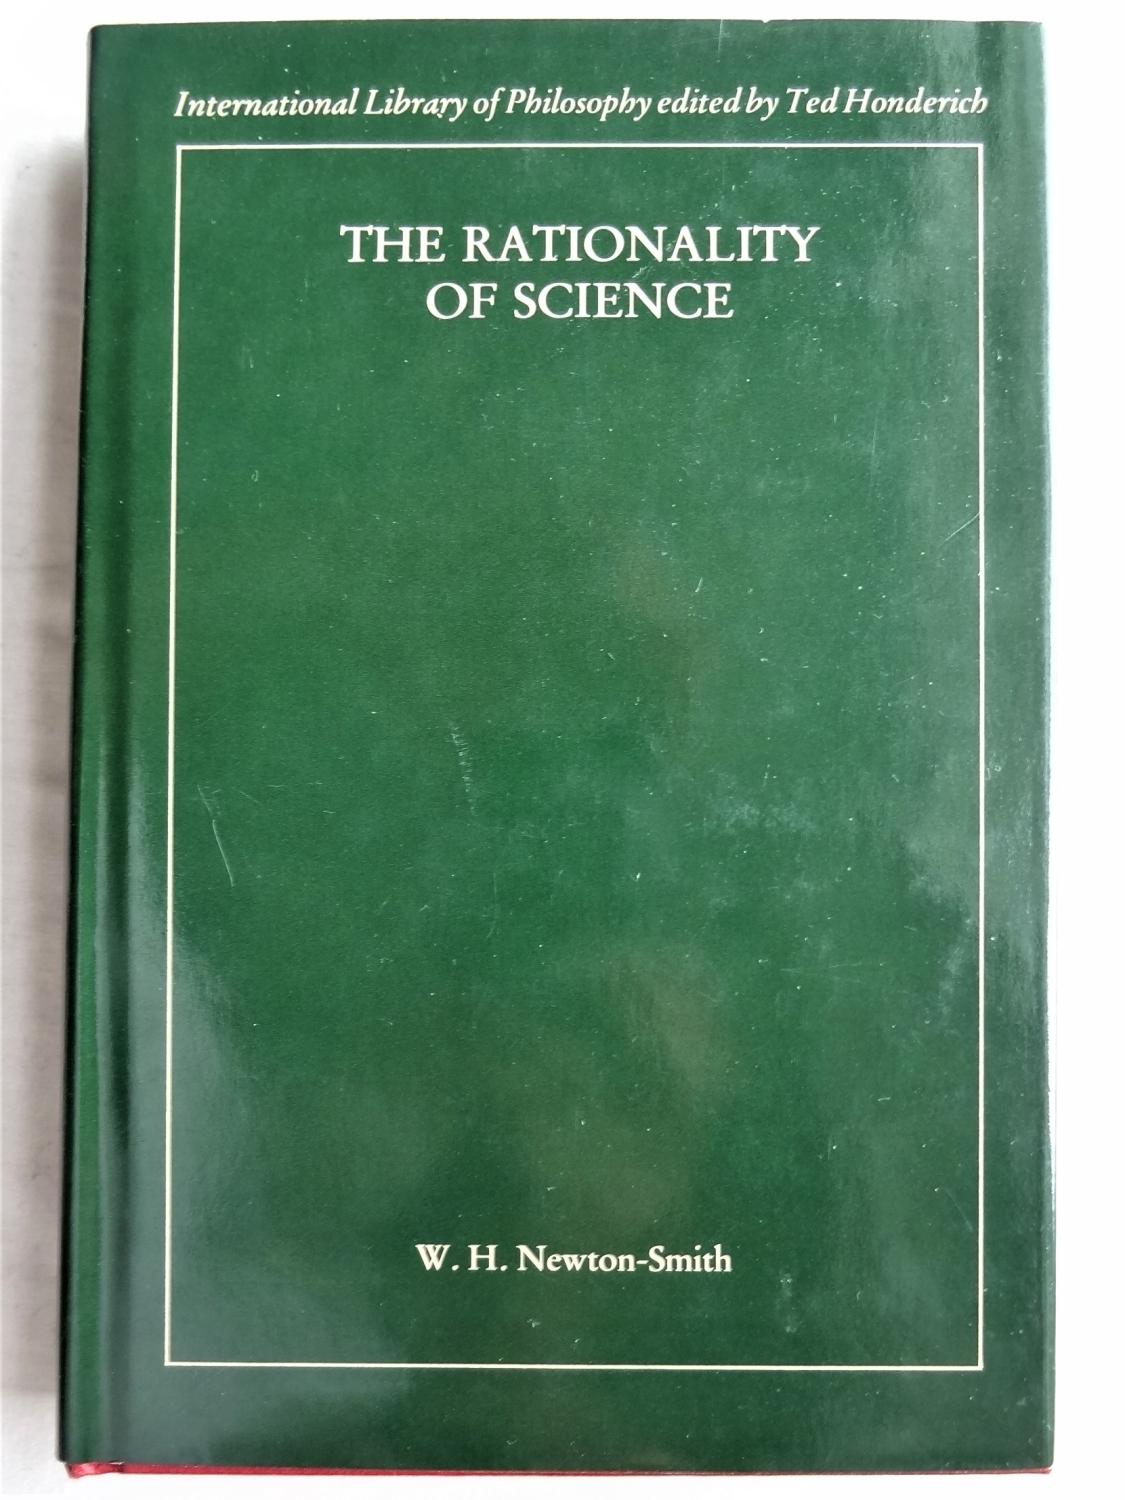 THE RATIONALITY OF SCIENCE - NEWTON-SMITH, W.H.